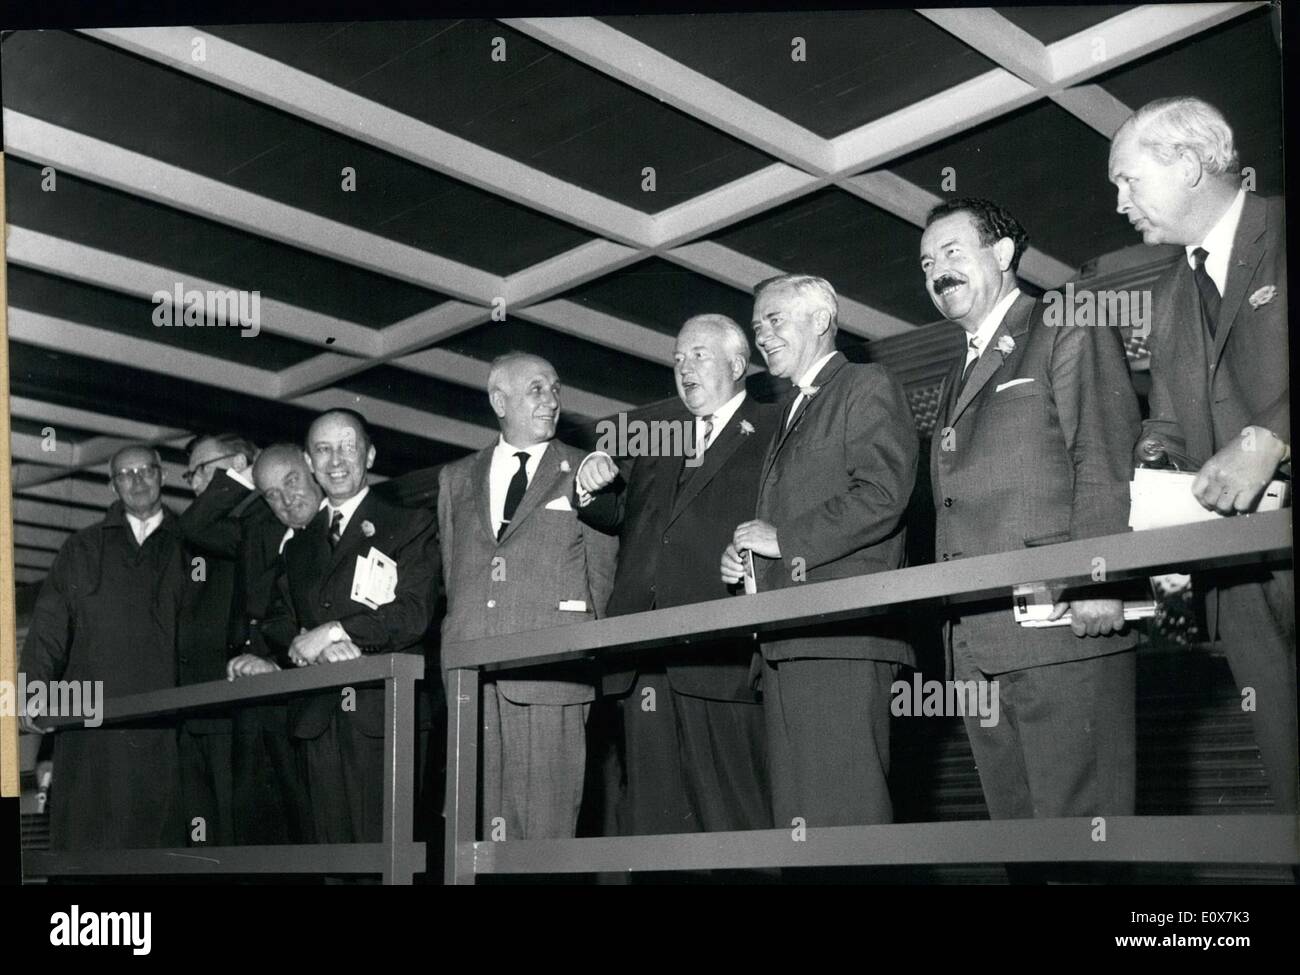 Sep. 09, 1965 - Minister Meeting at the first World Exhibition of Transport and Communications. On invitation of the German Minister of Transport. Dr. Hans Christoph Seebohm (Hans Christoph Seebohm) his colleagues of ten European countries which are all members of the European Conference of the Ministers of Transport visited the exhibition on August 31st. Photo shows f.l.t.r Stock Photo